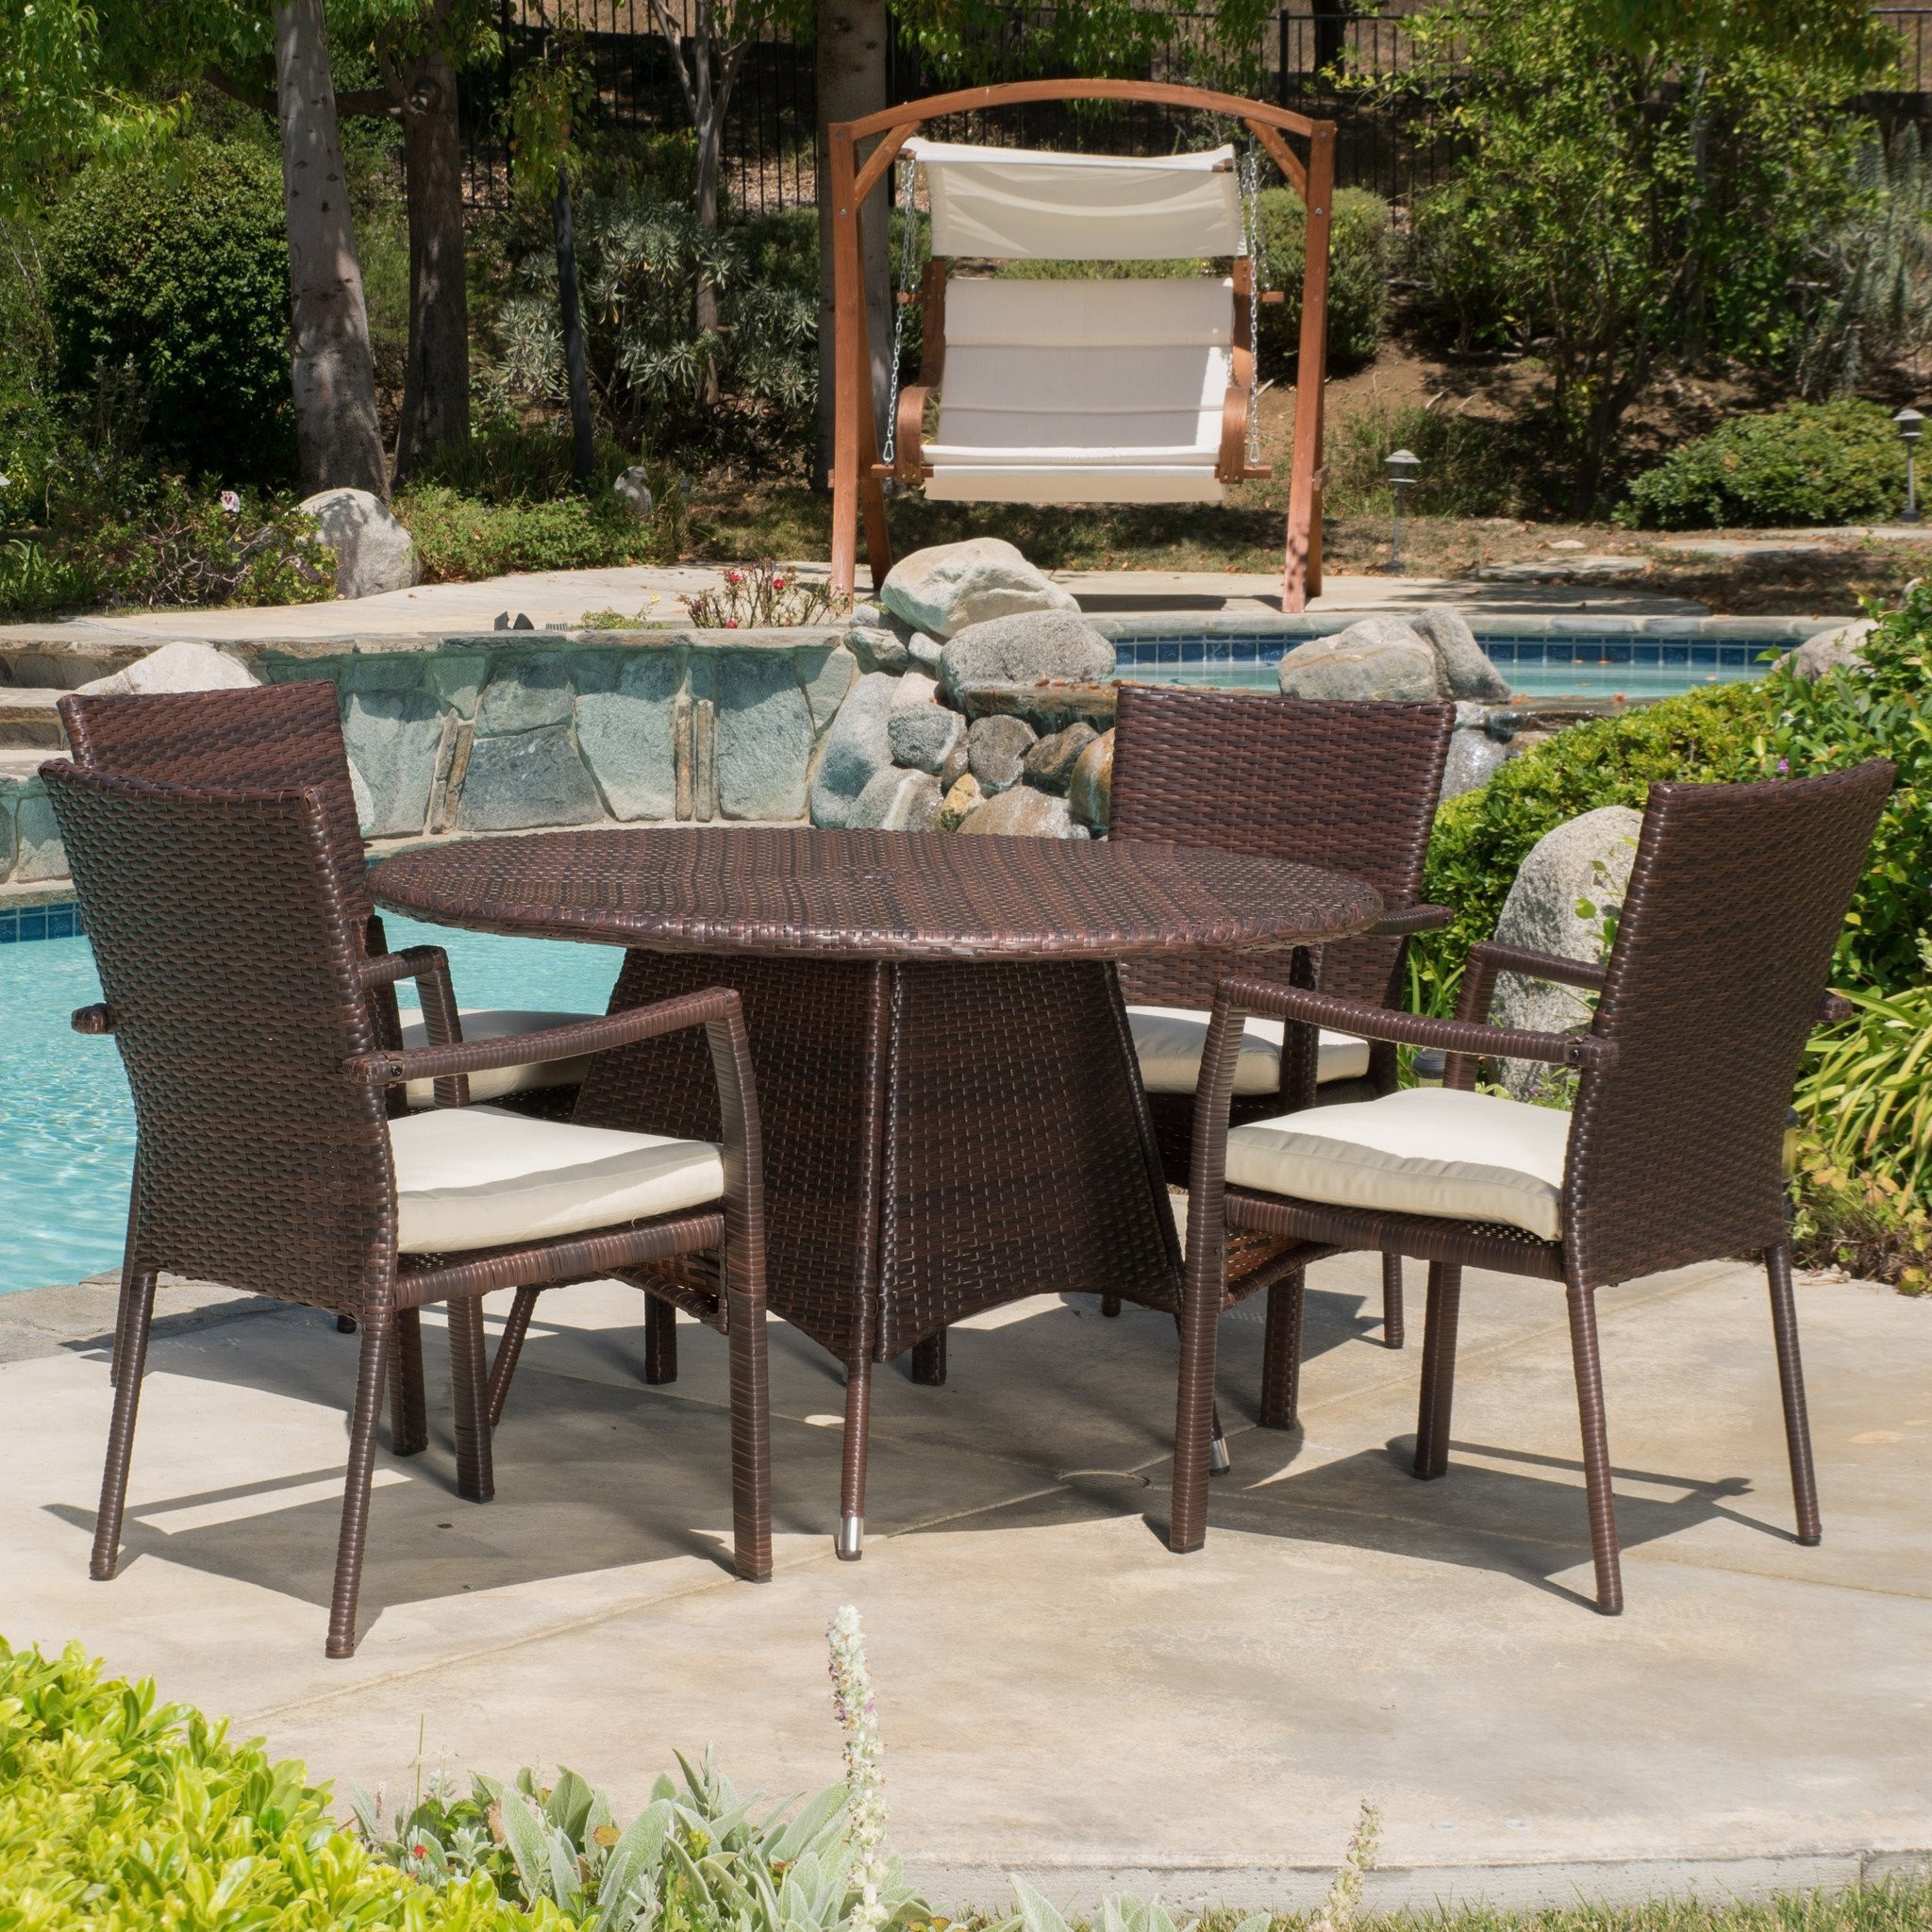 Cypress Outdoor 5-piece Wicker Dining Set with Cus...